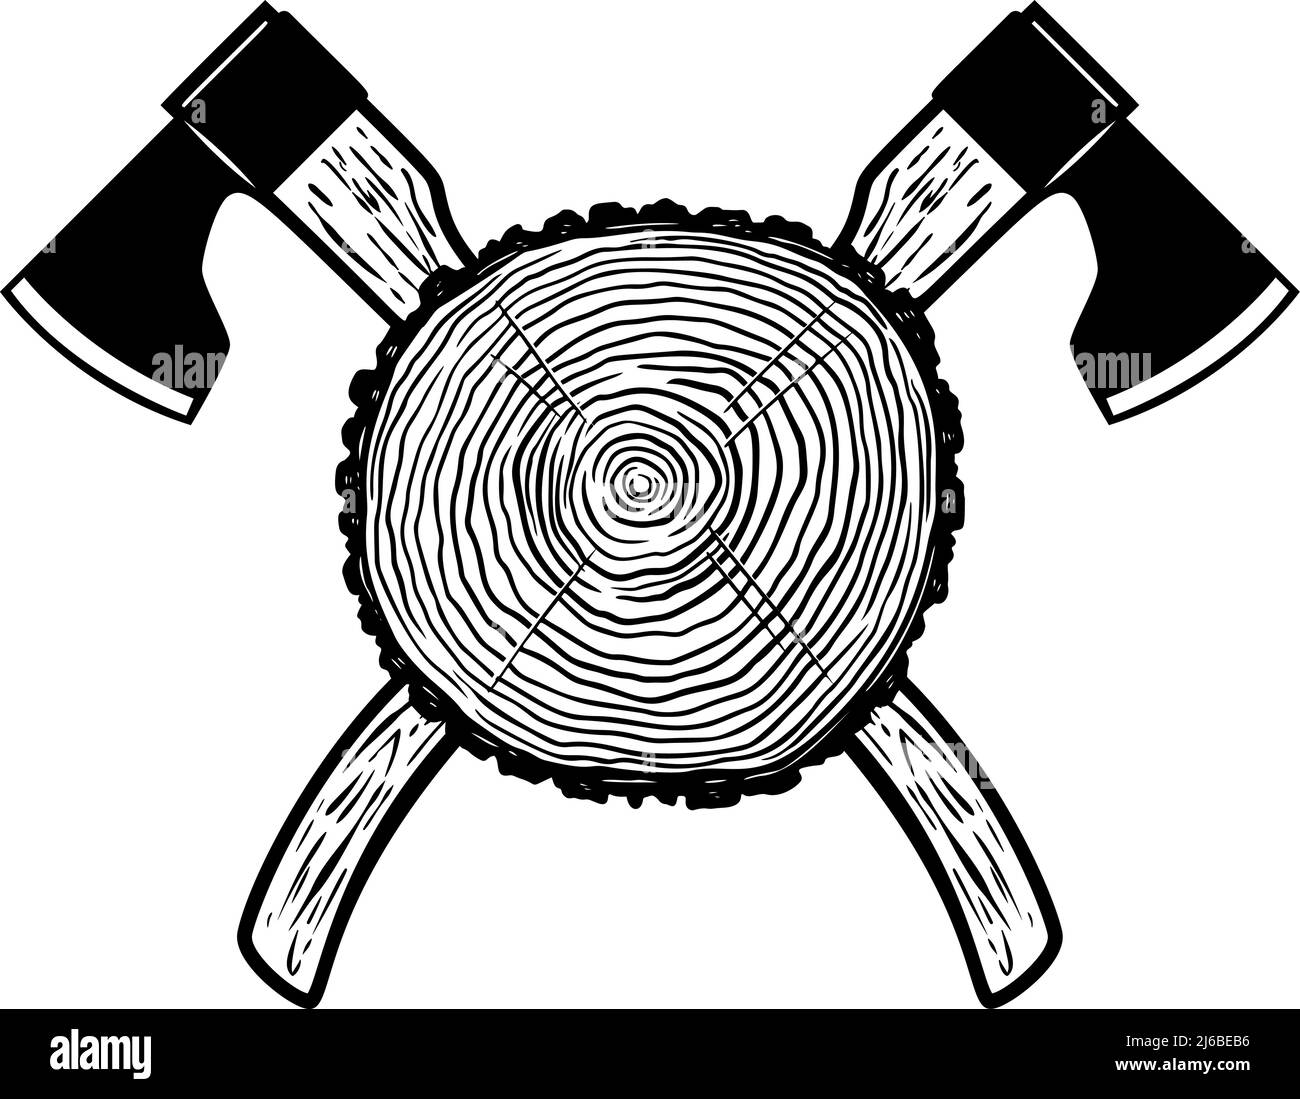 Crossed lumberjack axes with wood cut. Design element for logo, emblem, sign, poster, t shirt. Vector illustration Stock Vector